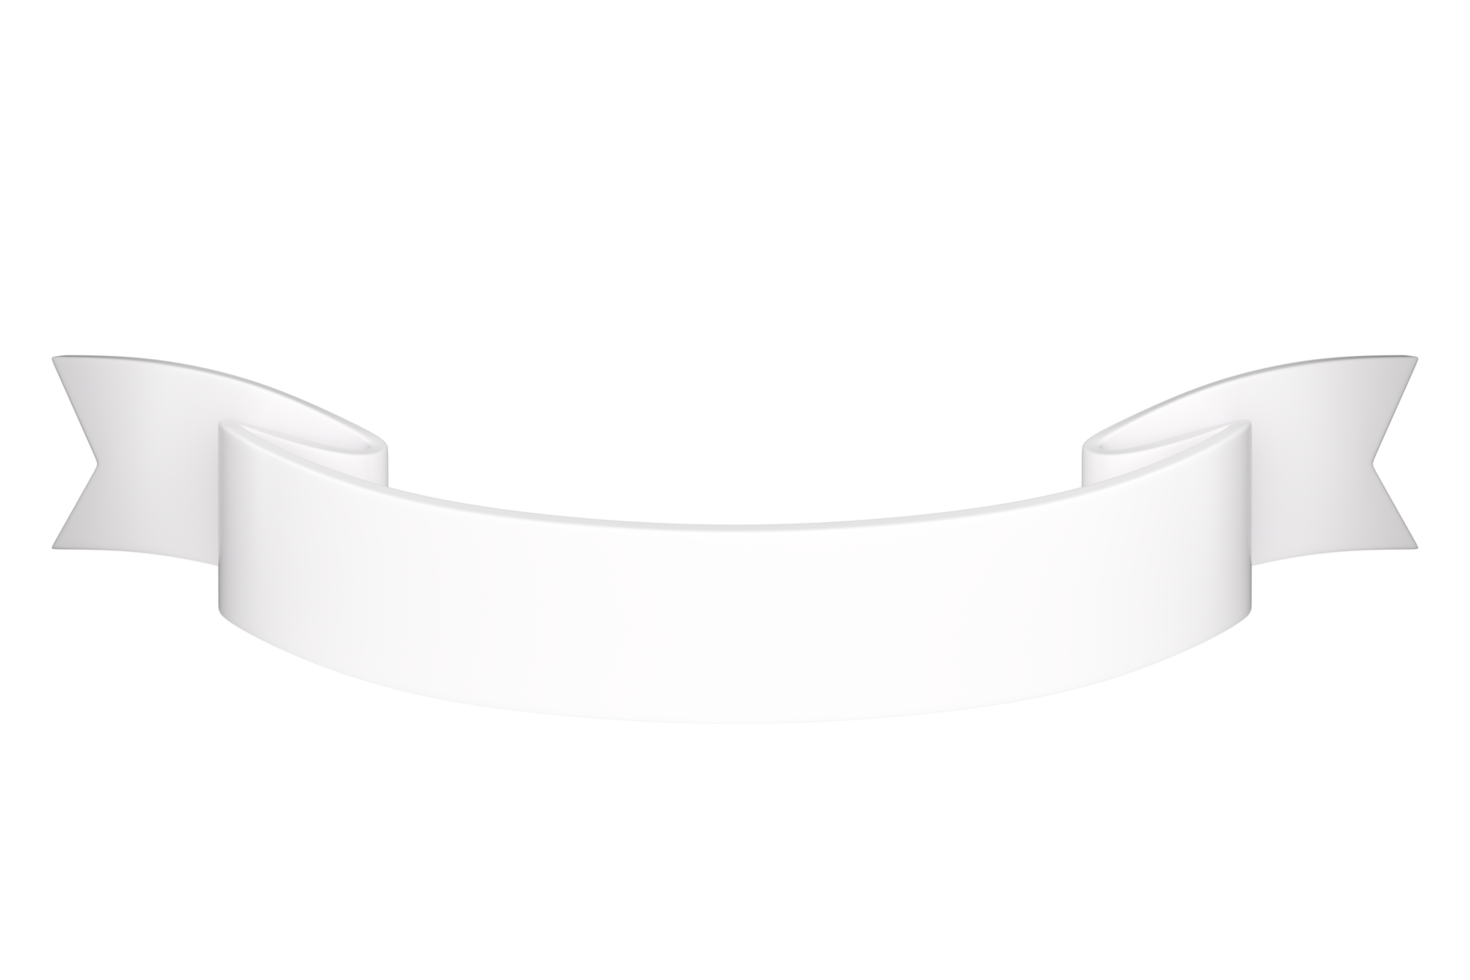 3d label ribbon. Glossy white blank plastic banner for advertisment, promo and decoration elements. High quality isolated render png